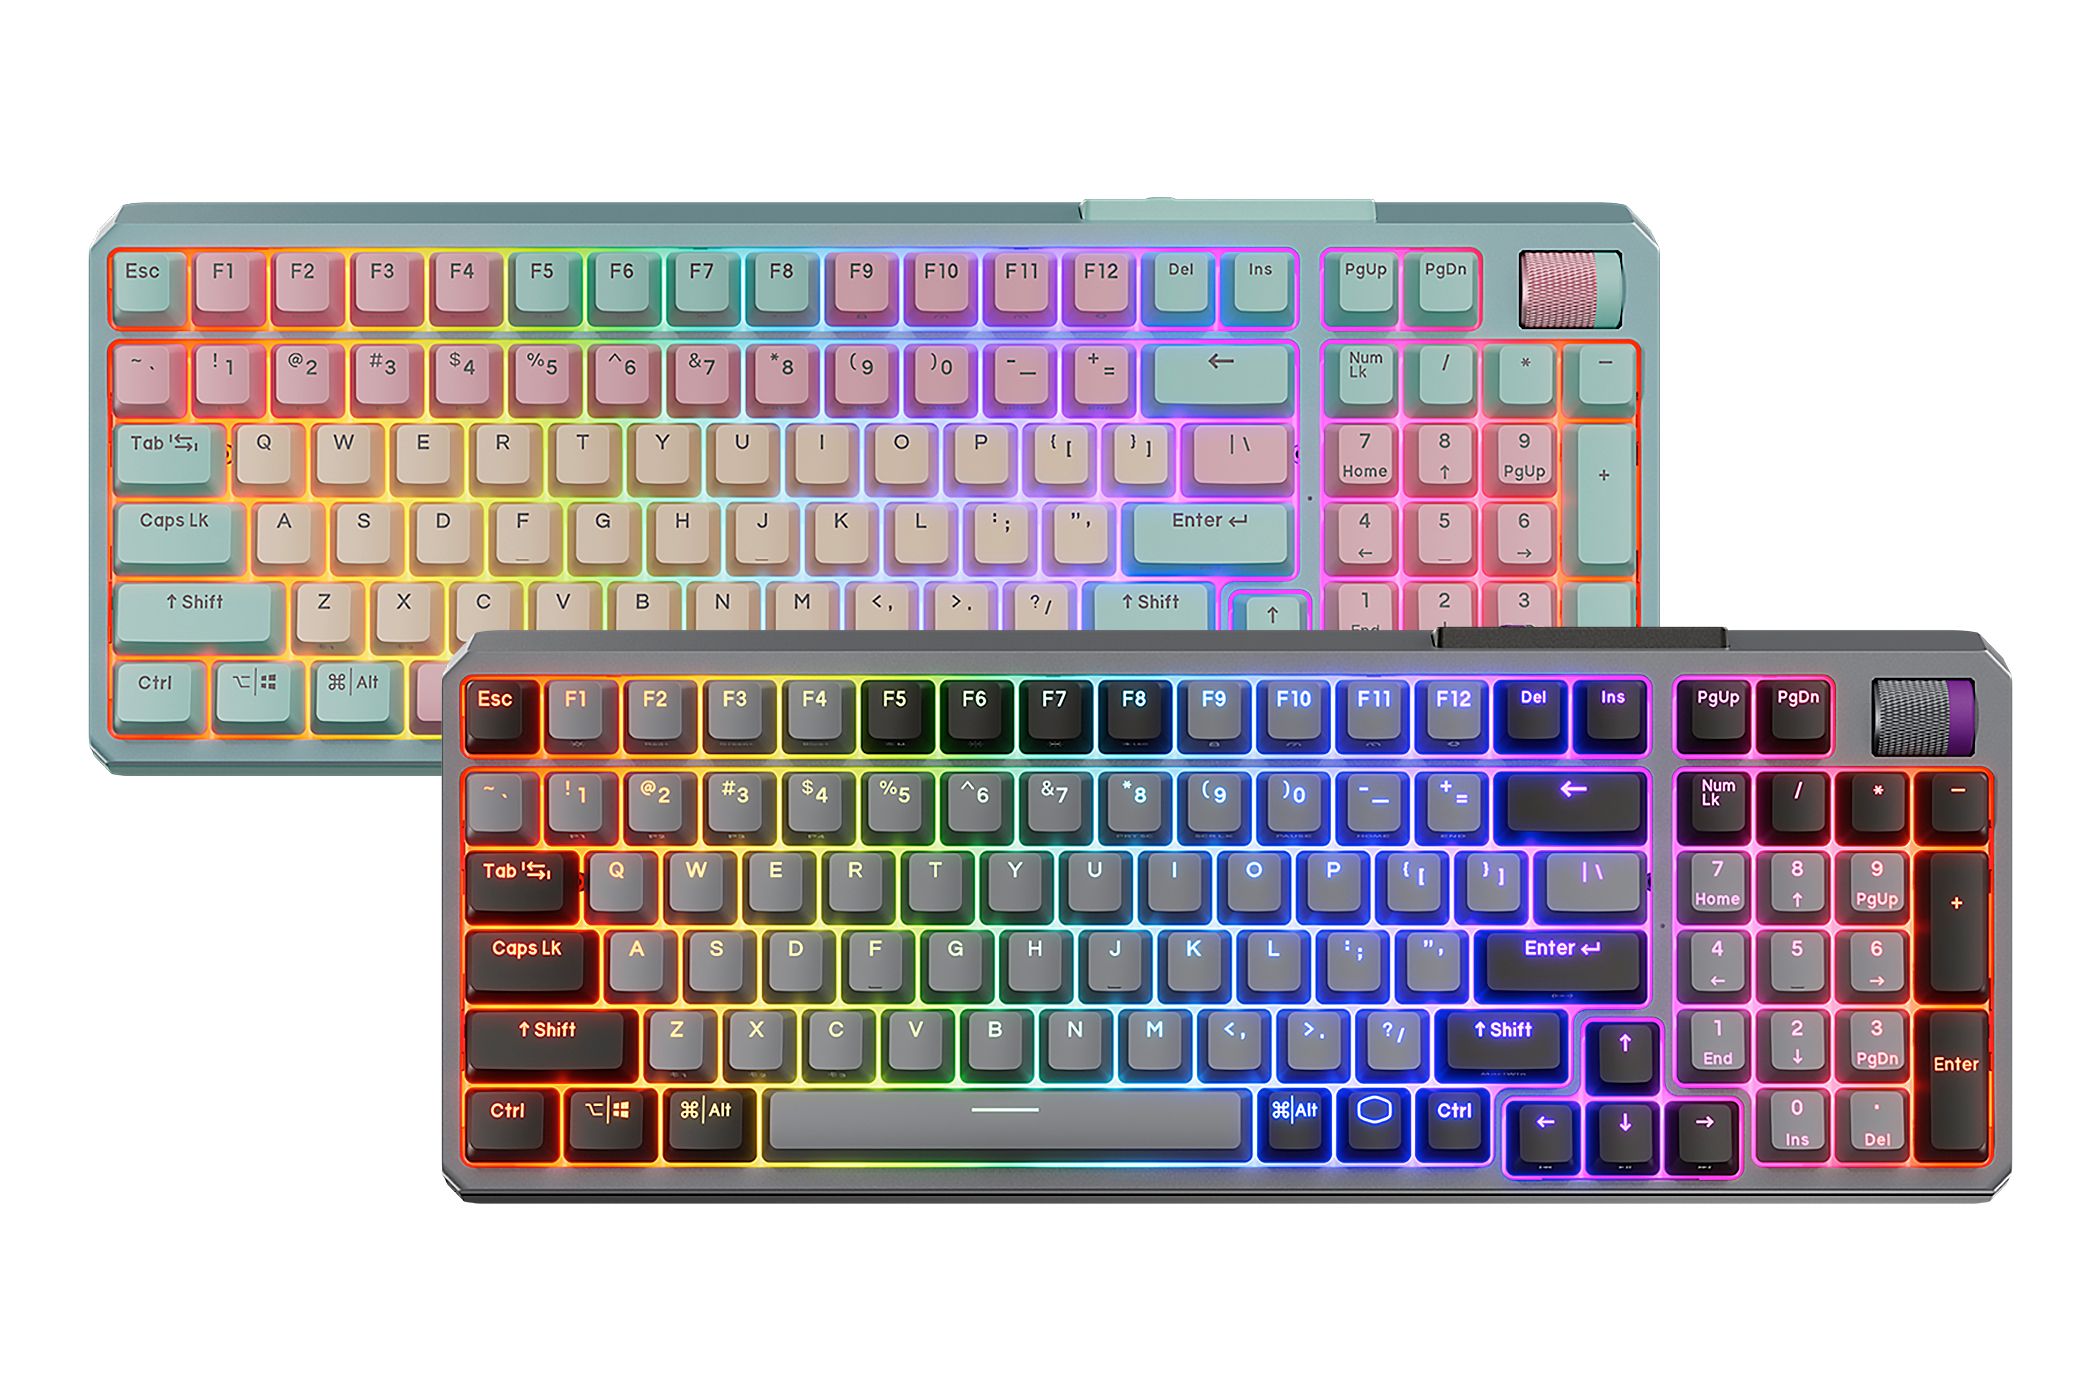 The Cooler Master MK770 keyboard in Space Gray and Macaron colorways.